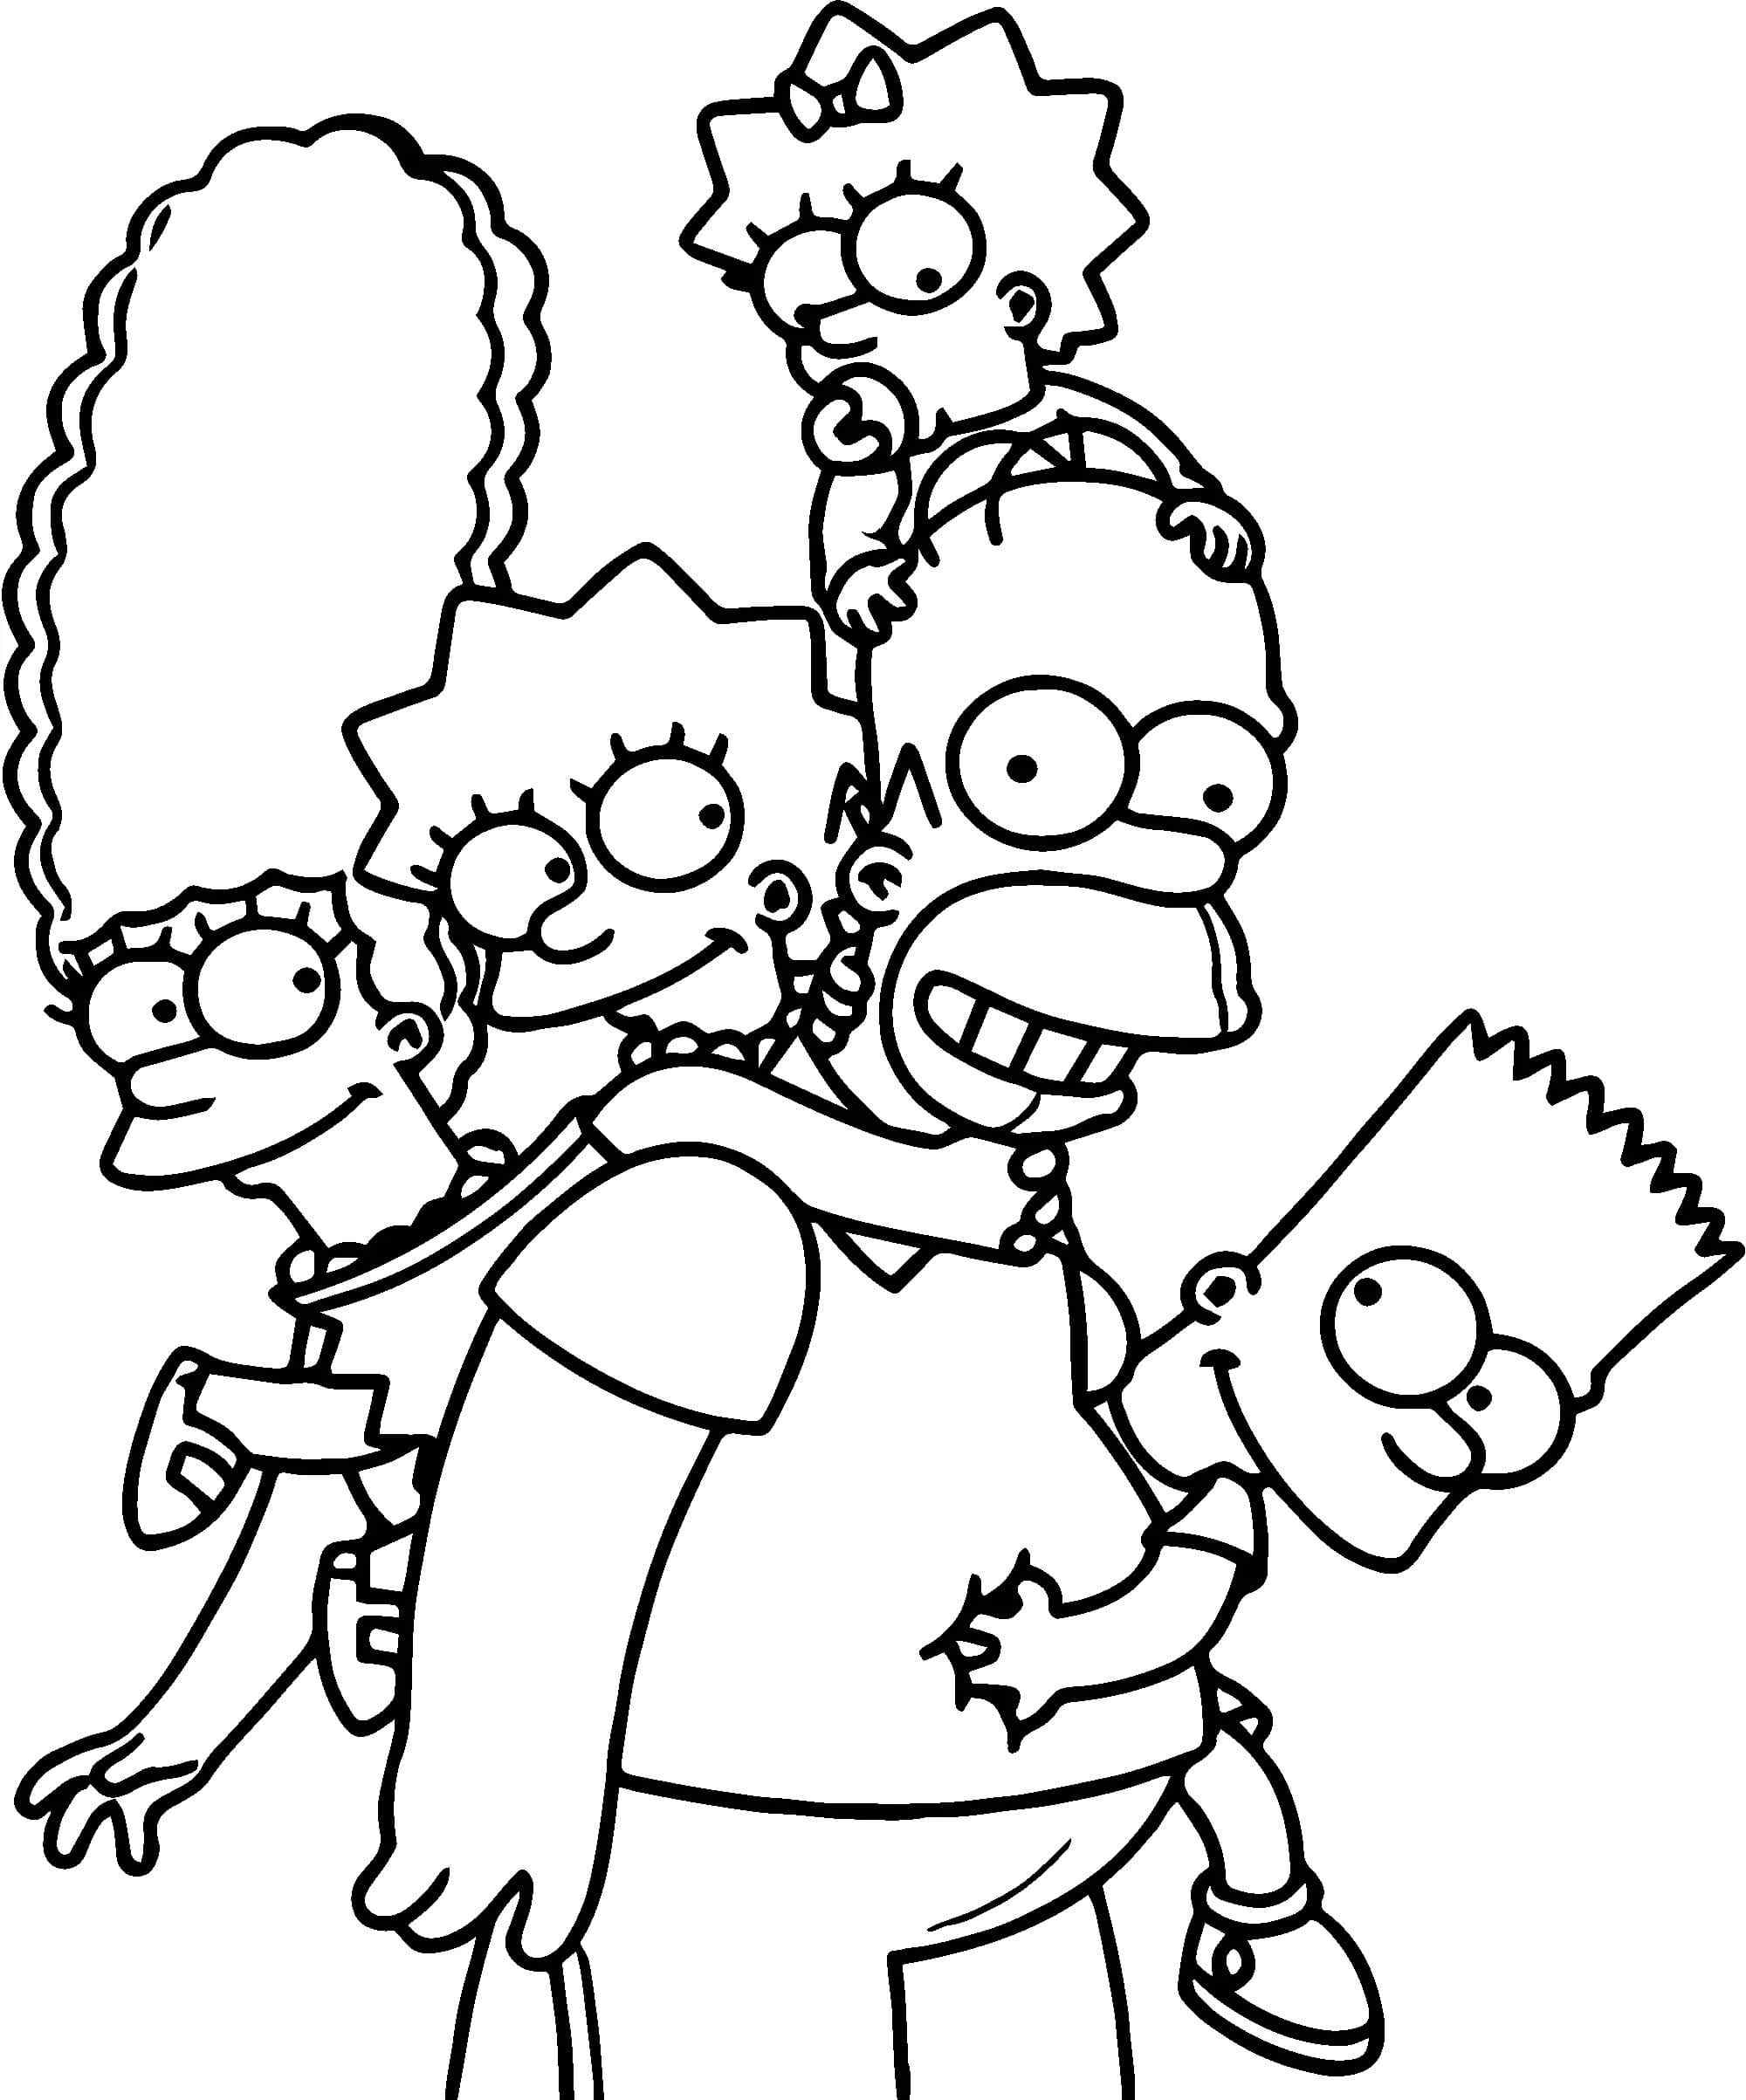 A Friendly Family Led By Homer Simpsons